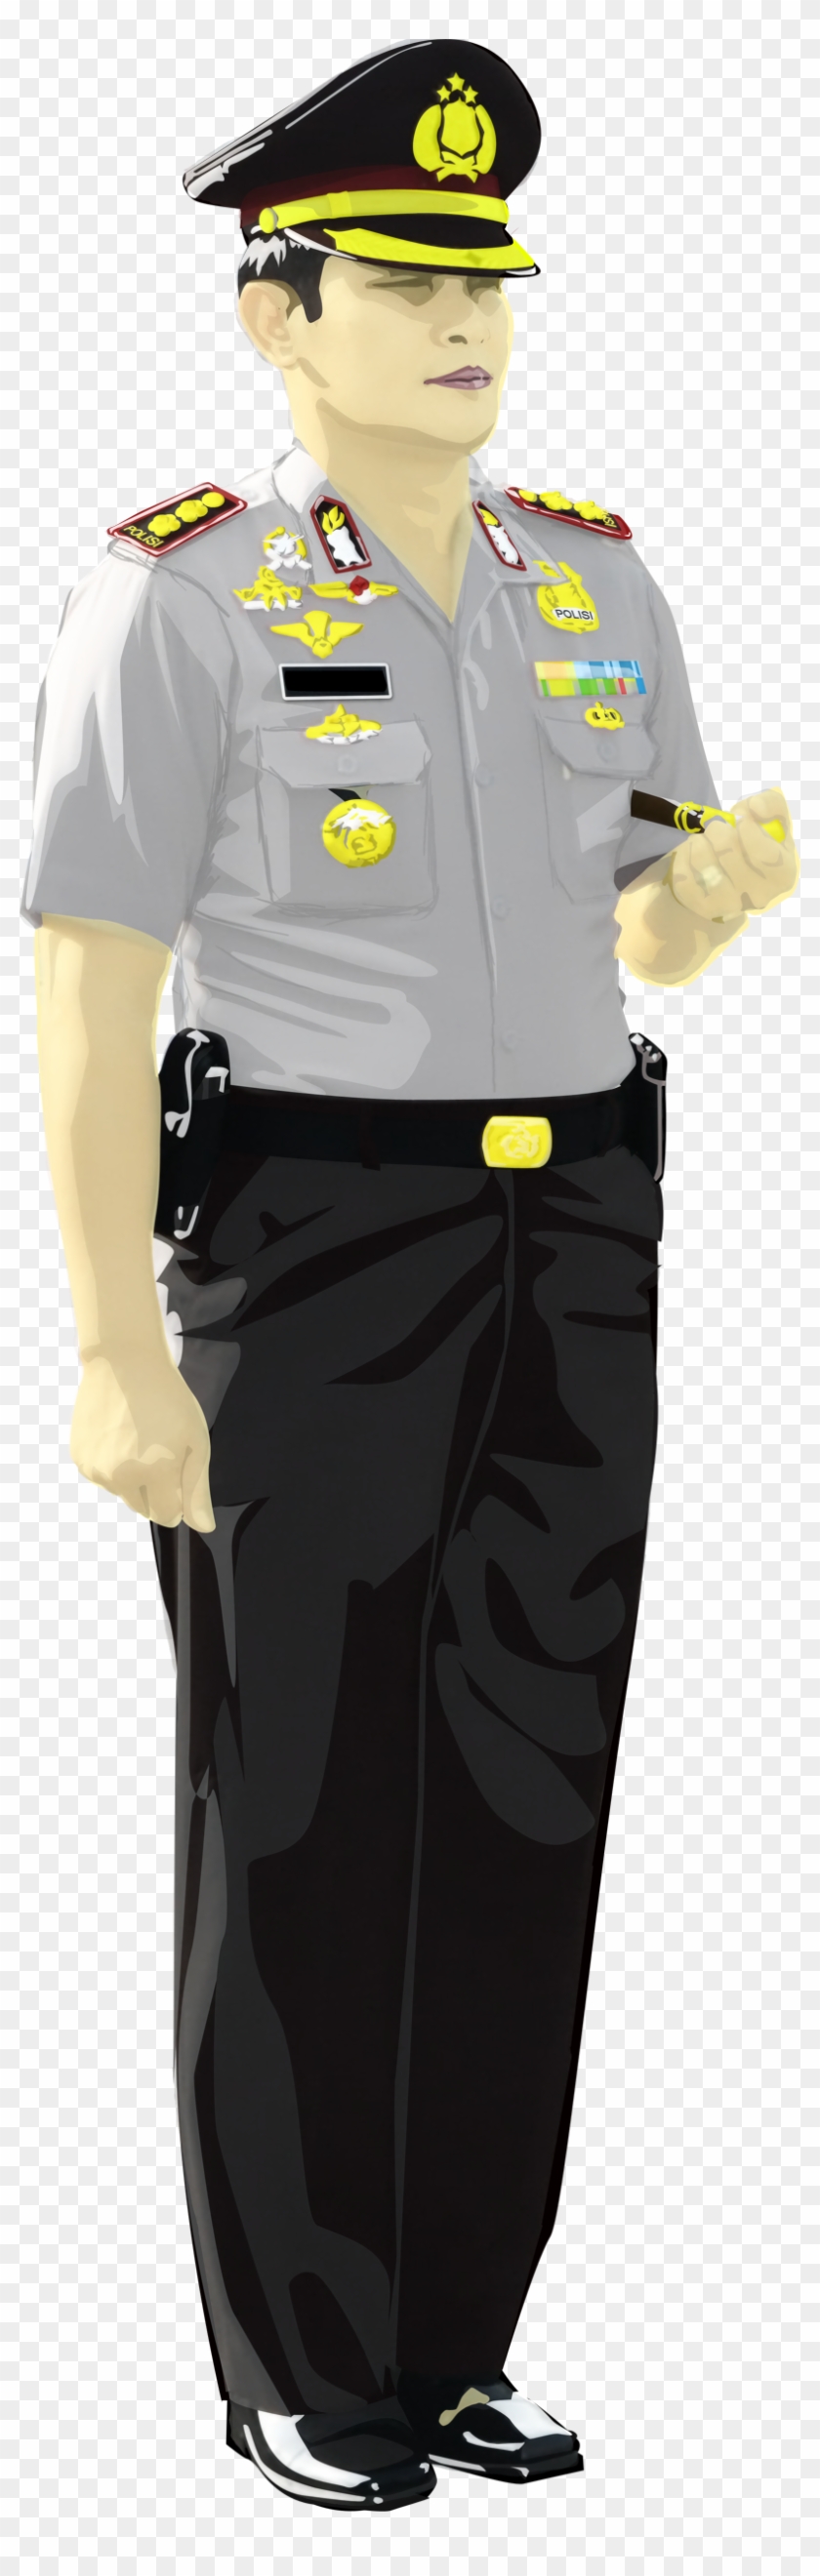 My Boss Gambar Polisi Png Free Transparent PNG Clipart Images Download